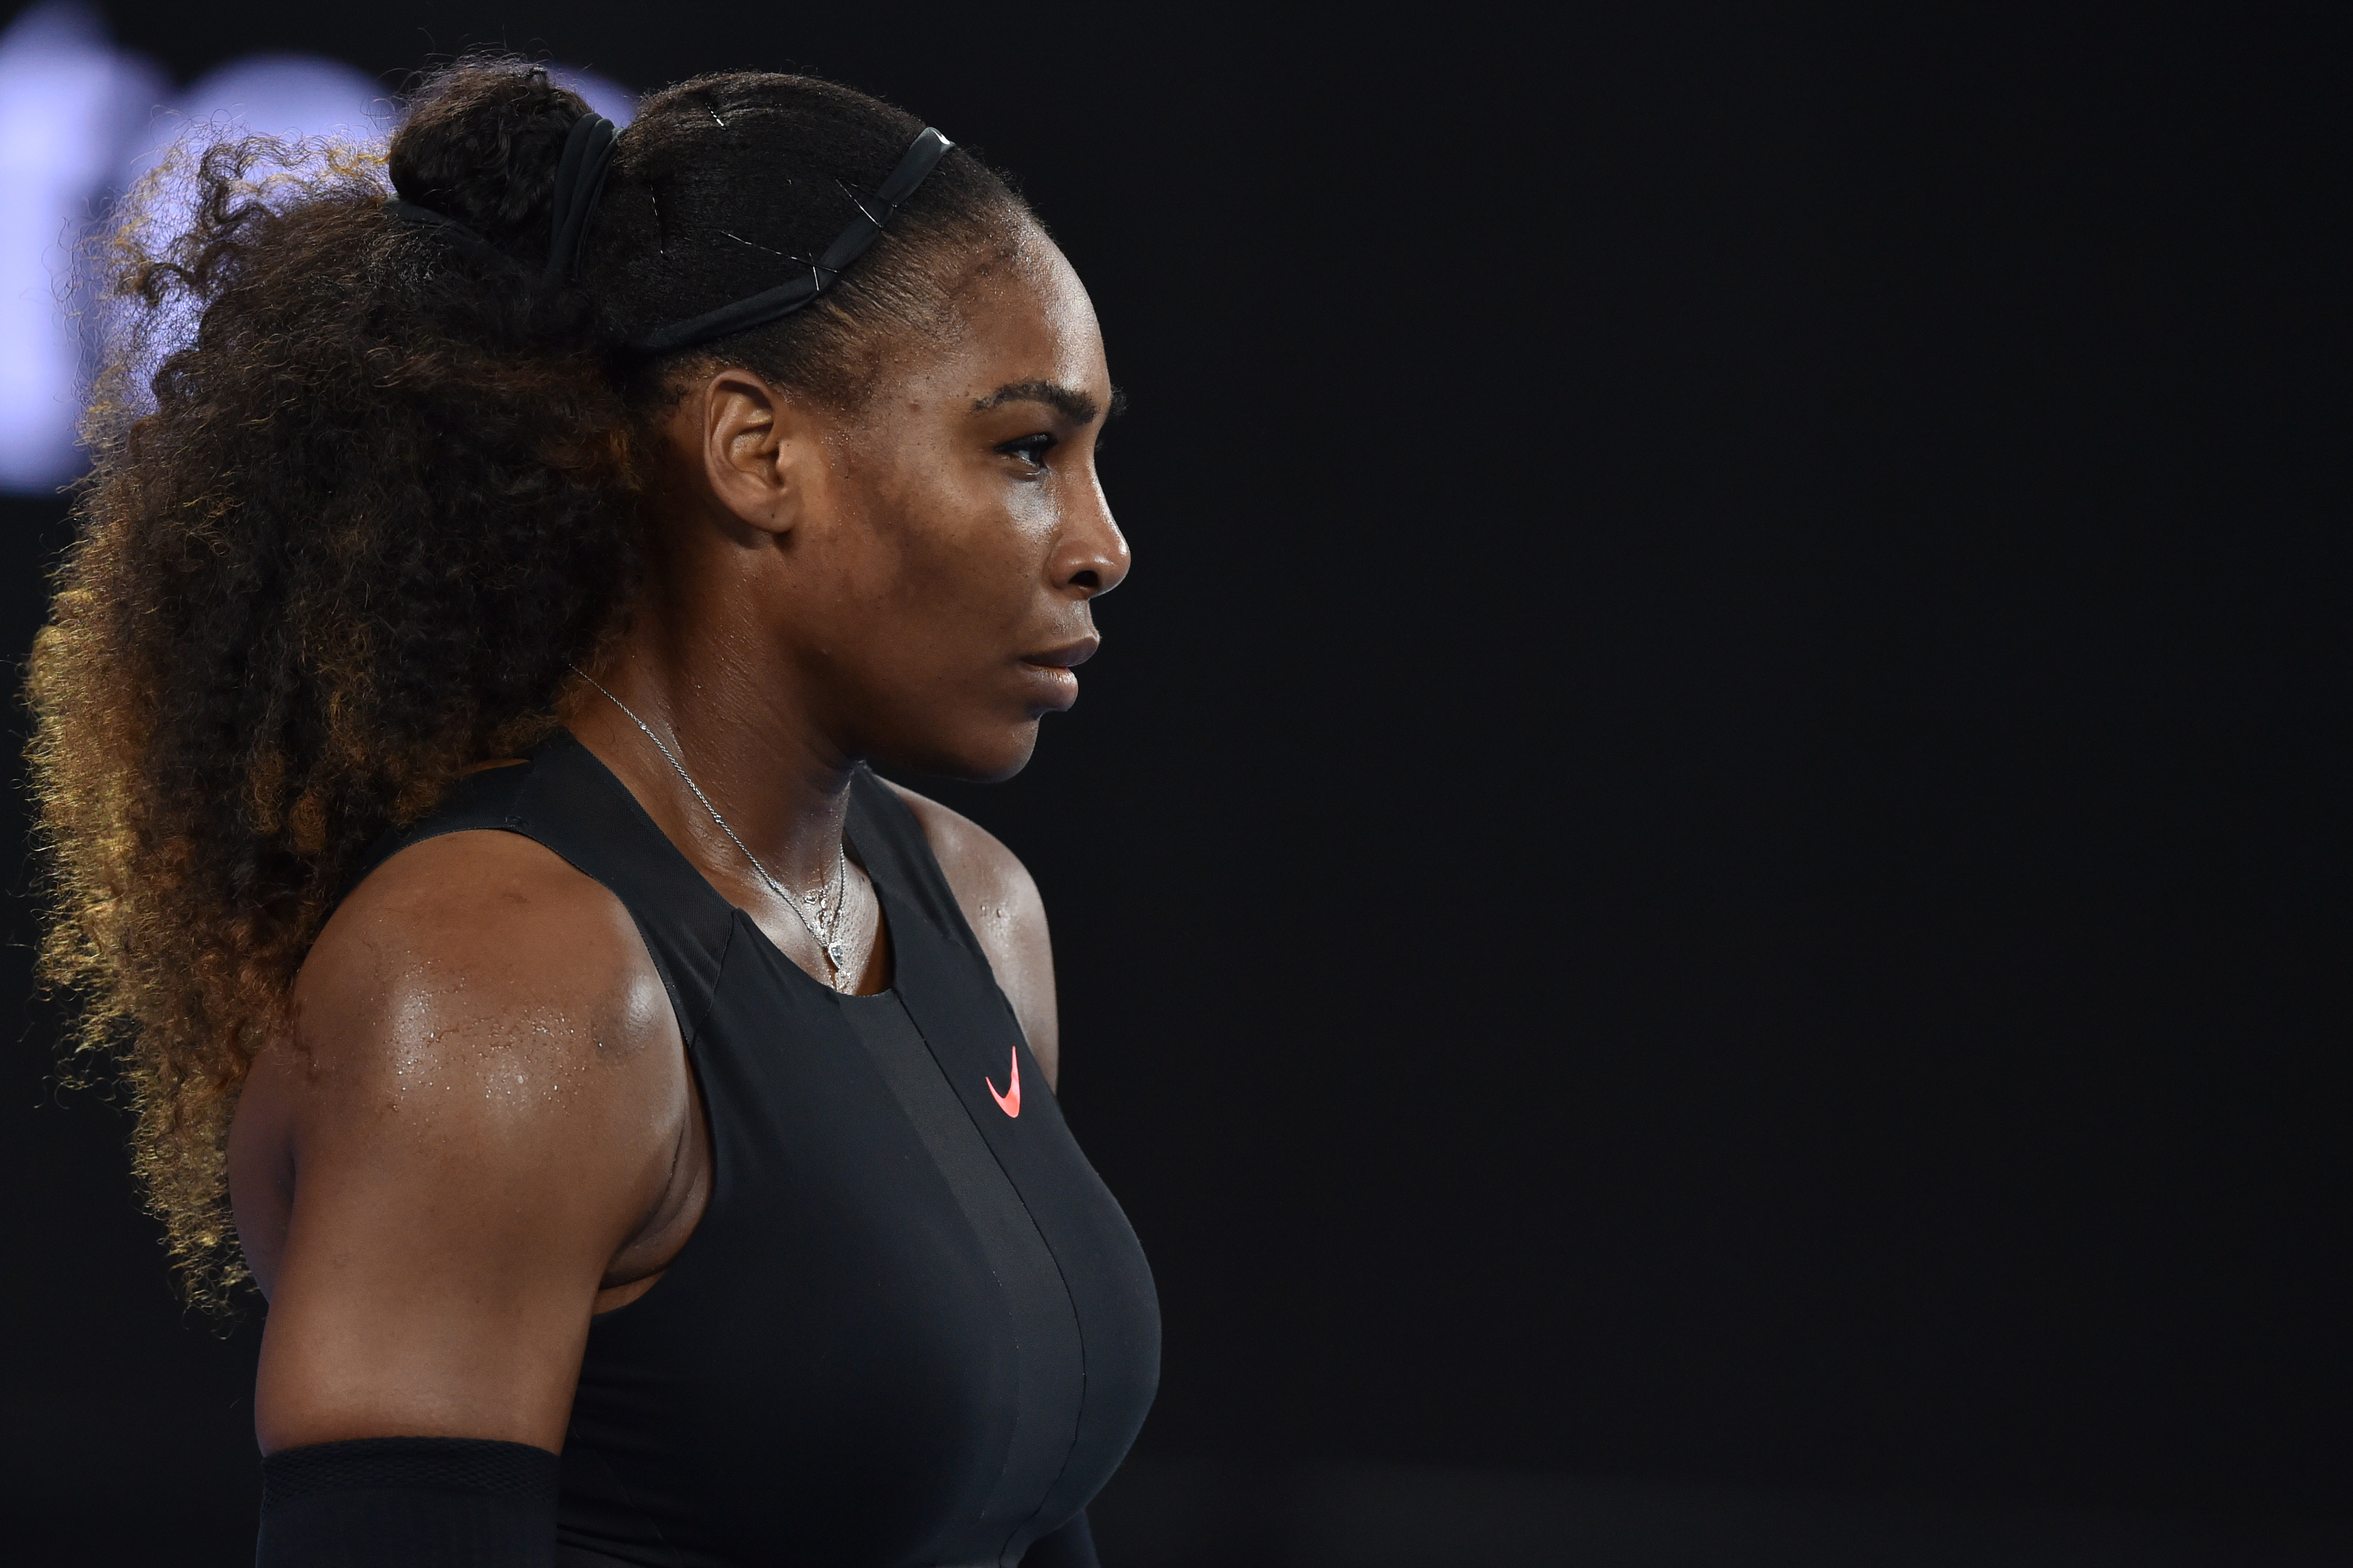 Serena Williams of the US prepares to play a point against Czech Republic's Lucie Safarova during their women's singles second round match on day four of the Australian Open tennis tournament in Melbourne on January 19, 2017. / AFP PHOTO / PAUL CROCK / IMAGE RESTRICTED TO EDITORIAL USE - STRICTLY NO COMMERCIAL USE